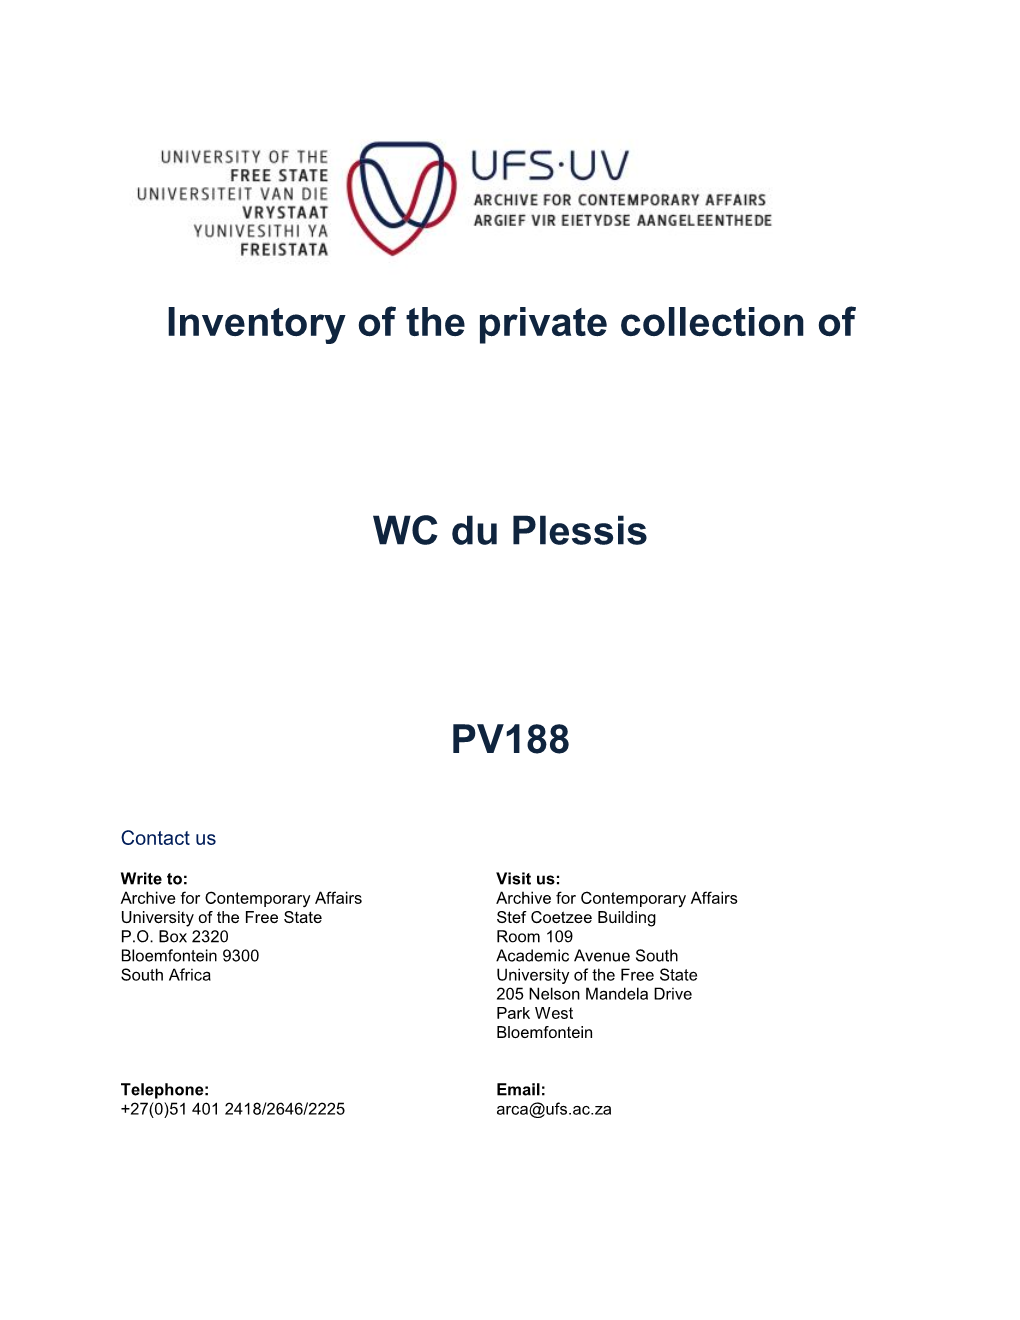 Inventory of the Private Collection of WC Du Plessis PV188